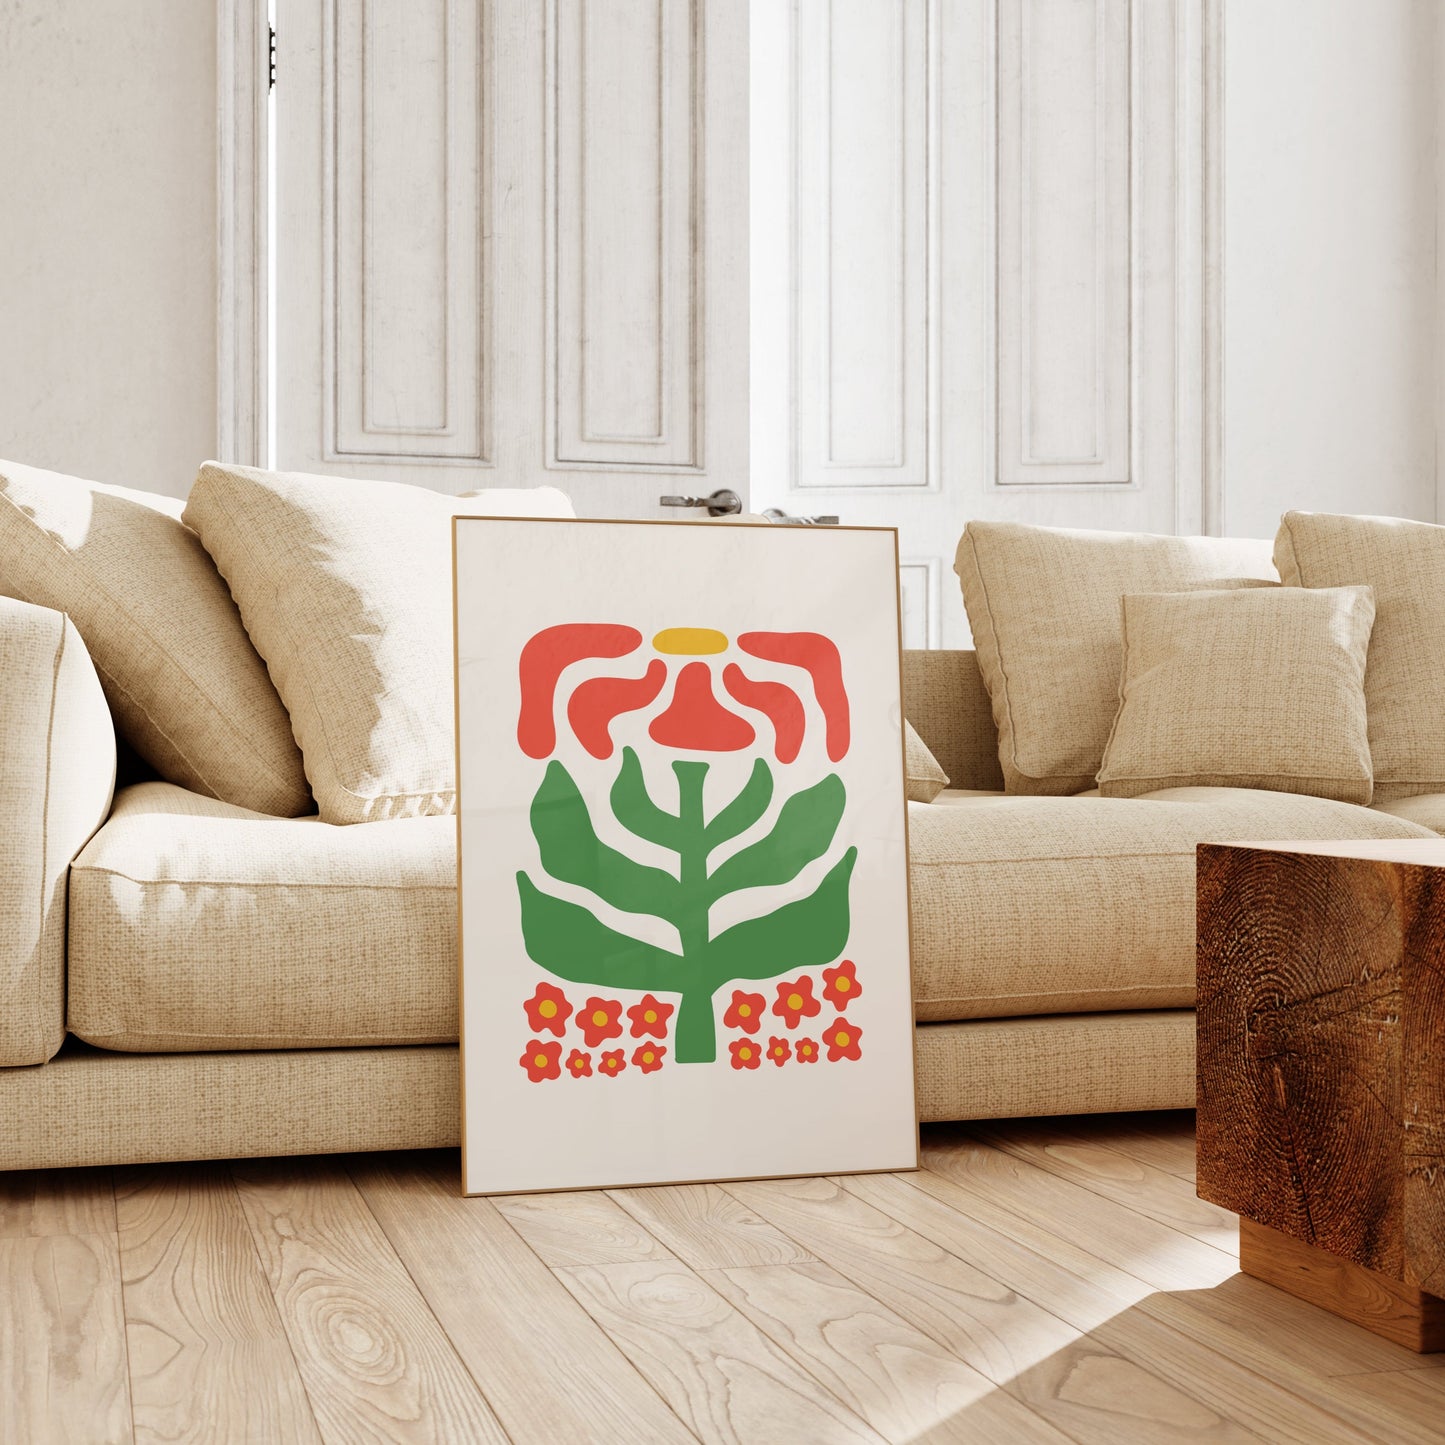 Funky Red Flower Poster